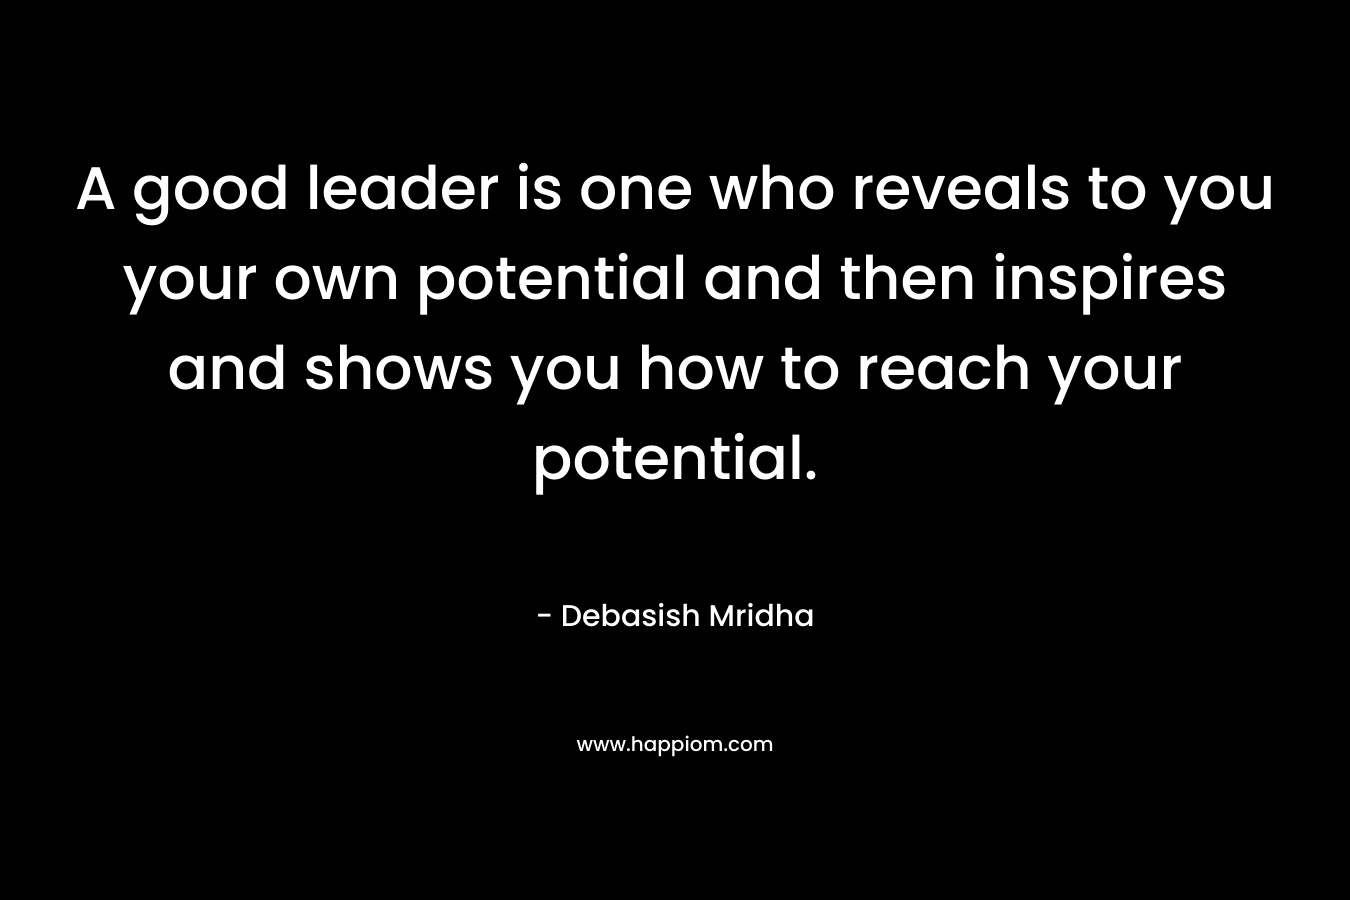 A good leader is one who reveals to you your own potential and then inspires and shows you how to reach your potential.